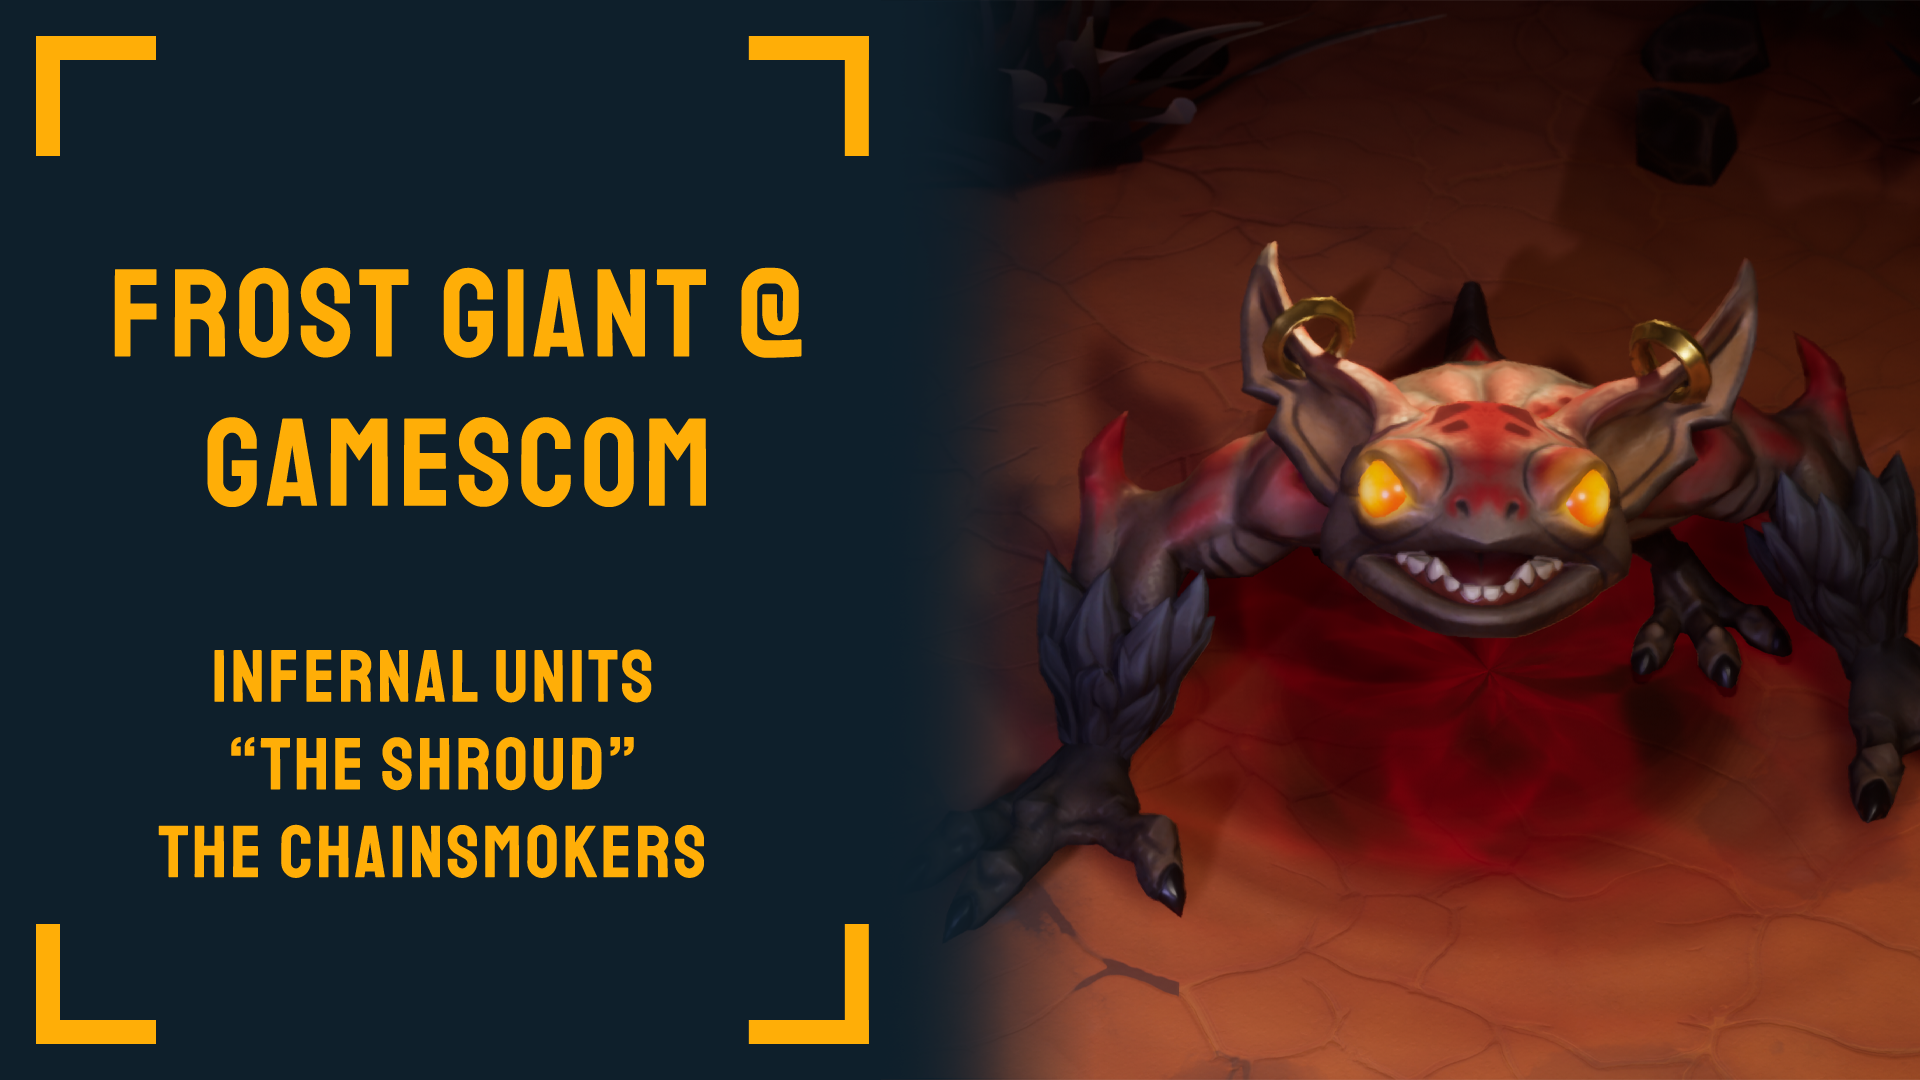 Forst Giant at Gamescom Header with Infernal Imp and Chainsmokers